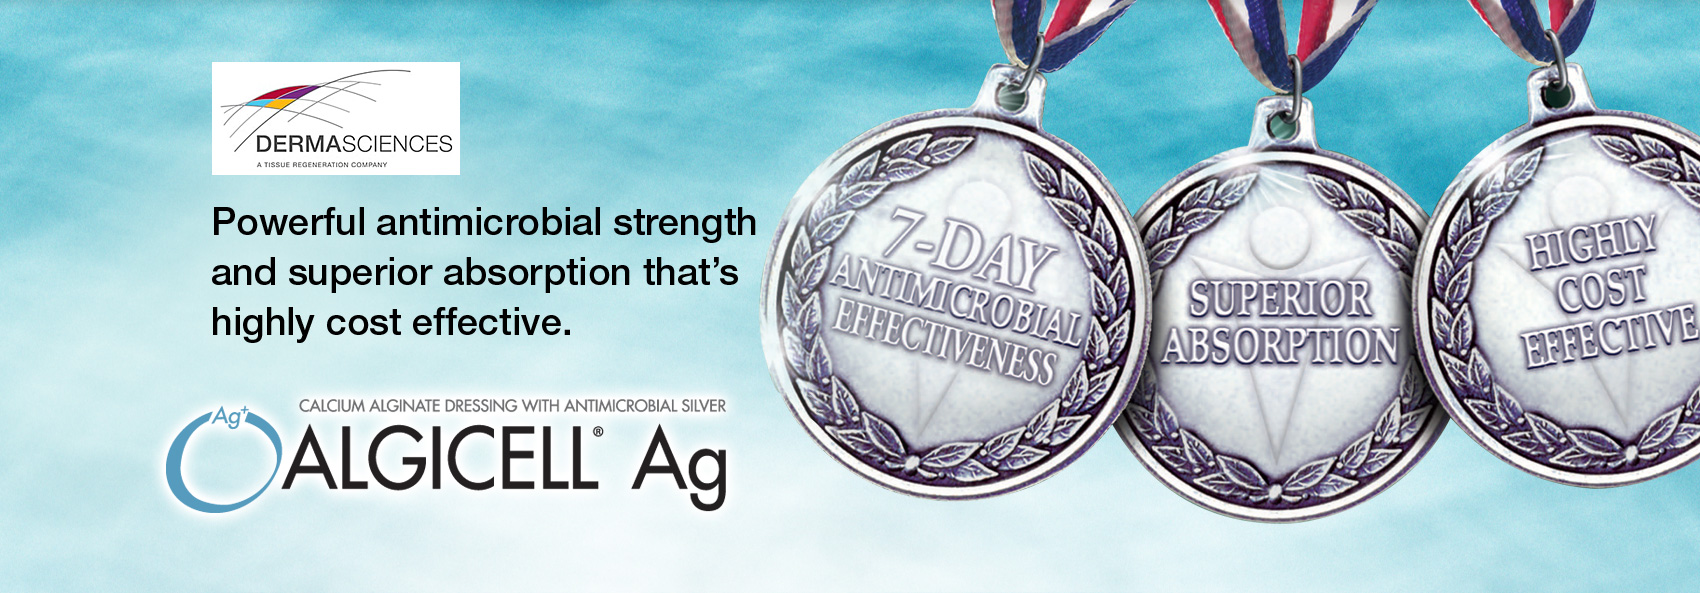 Algicell Ag - Powerful antimicrobial strength and superior absorption that's highly cost effective